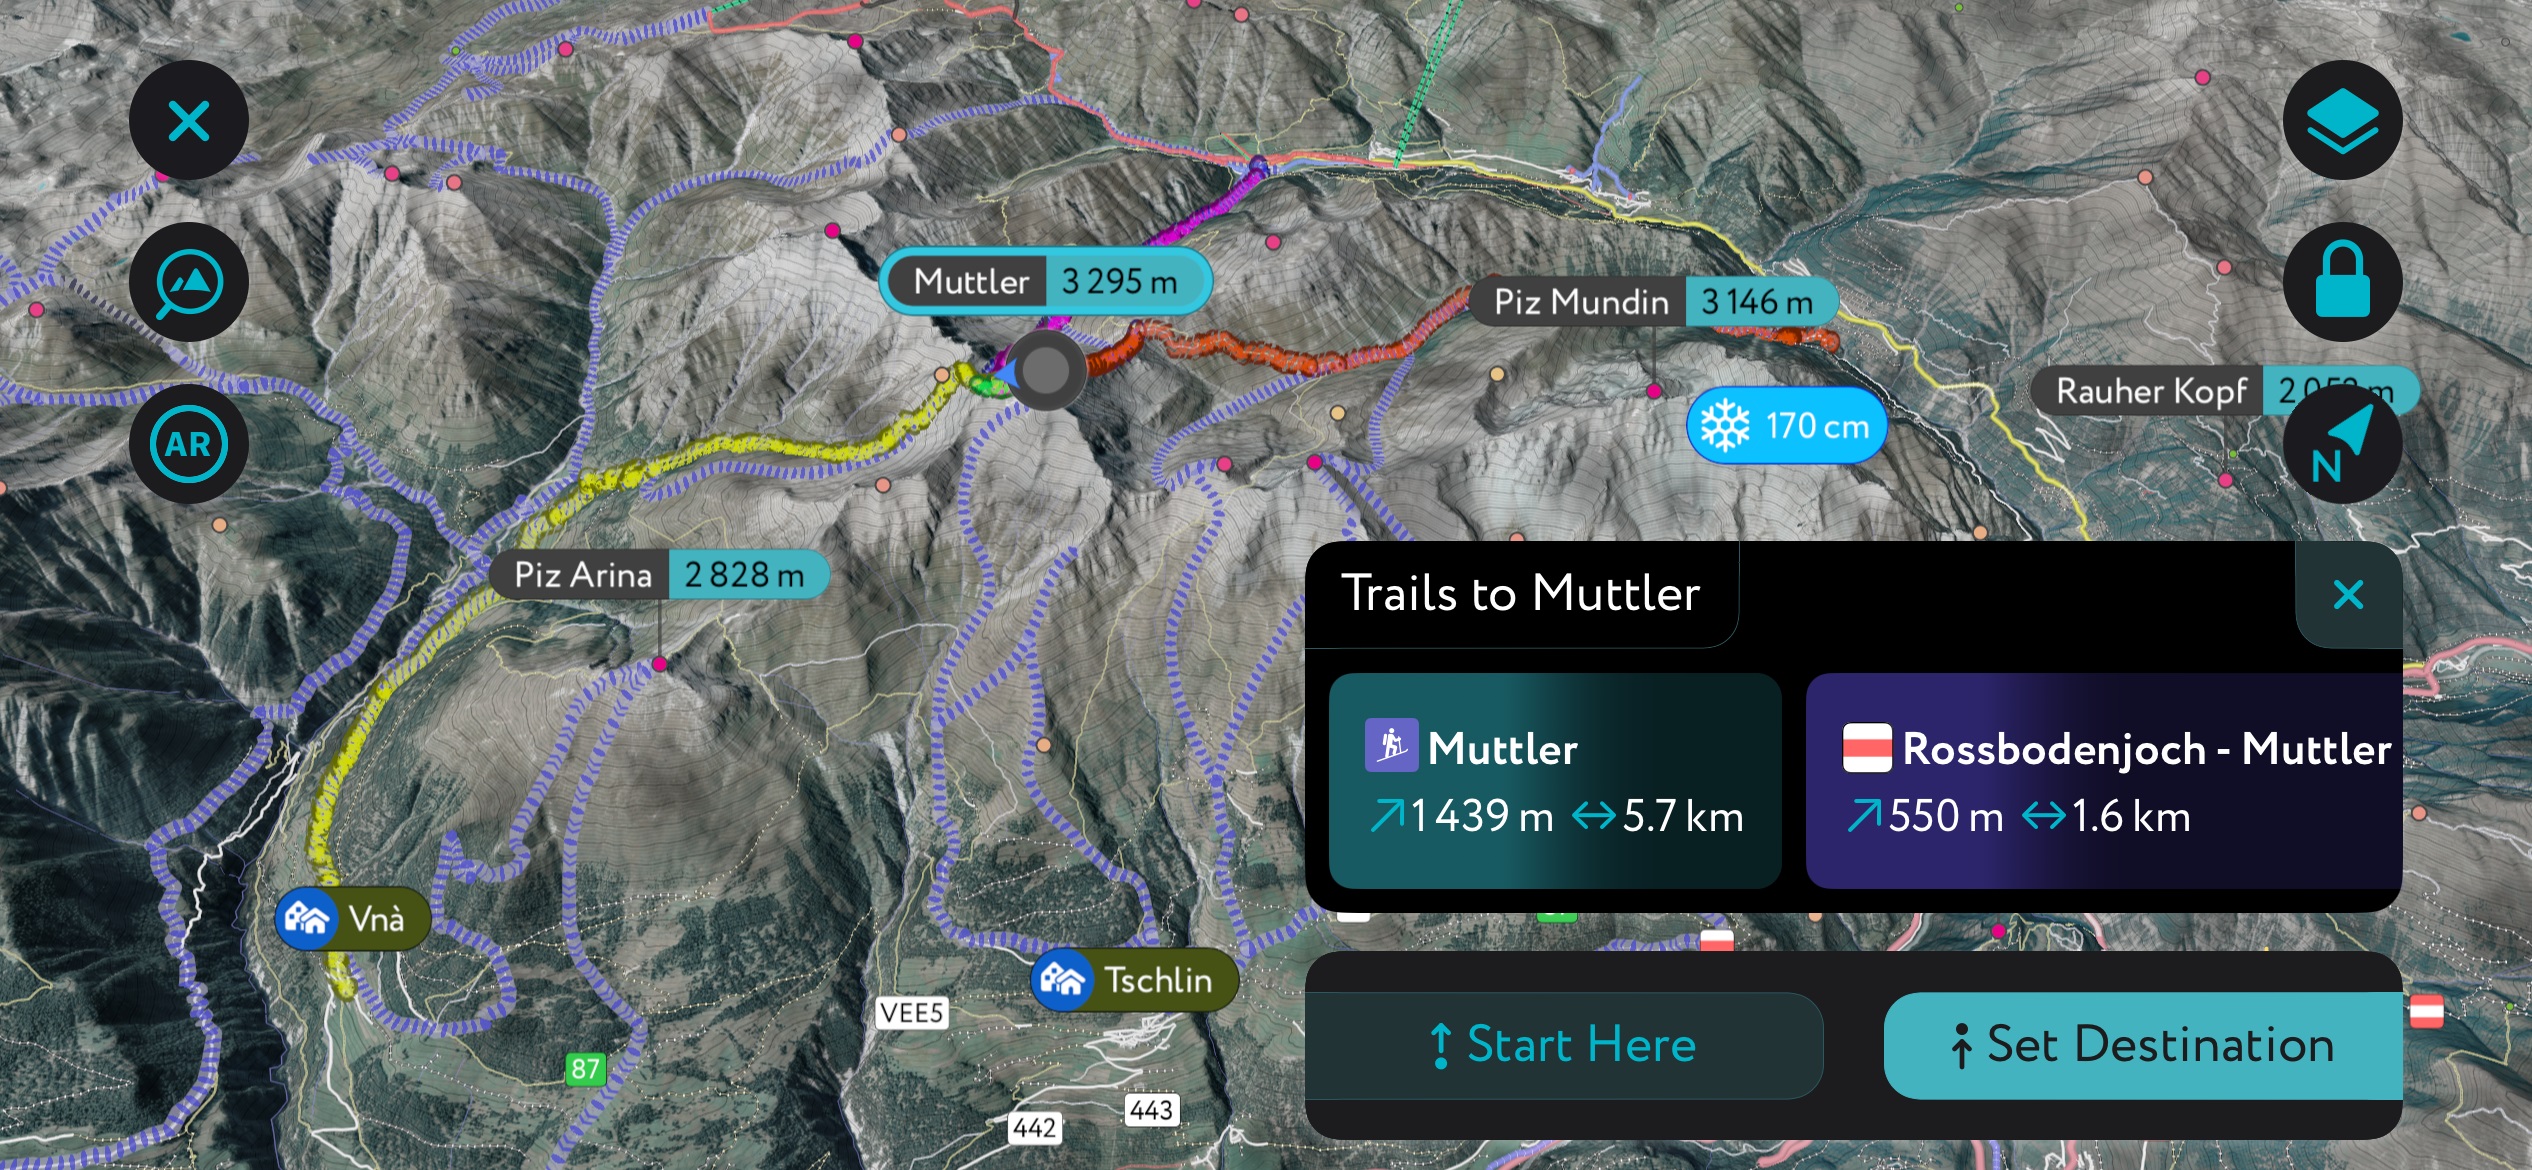 Using the PeakVisor app to map out ski tours to Muttler. Samnaun Alps